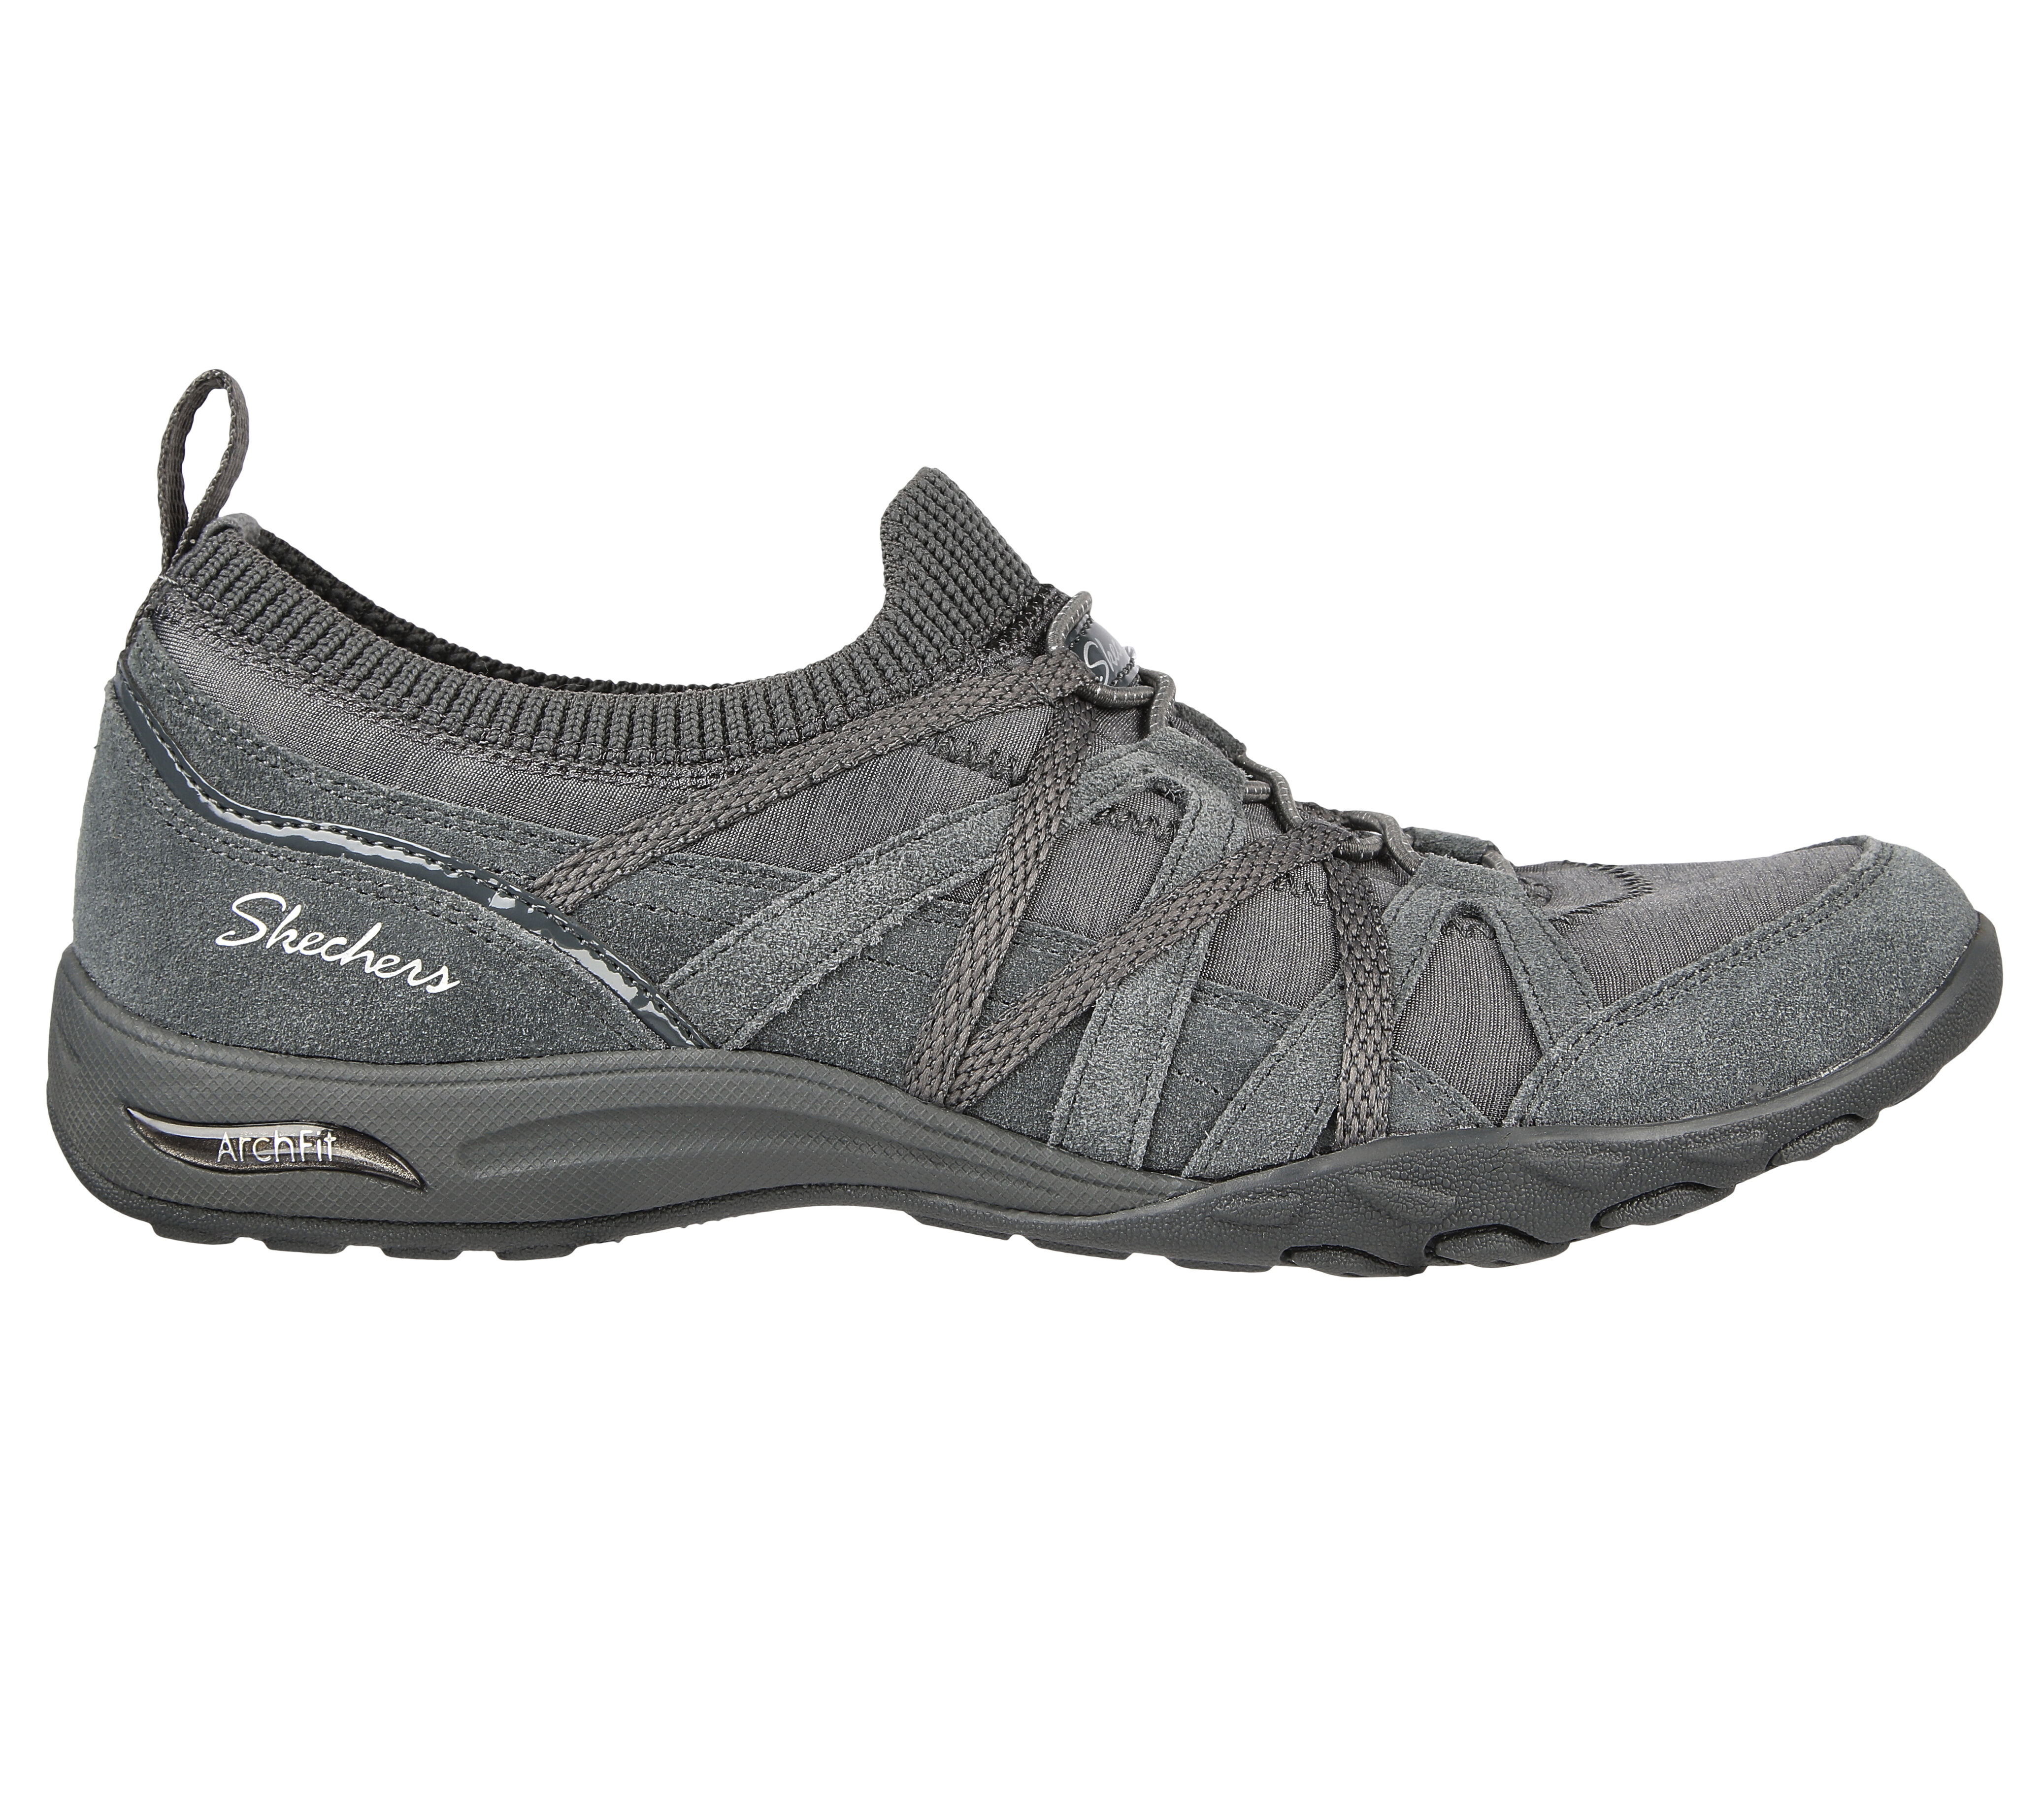 Skechers Relaxed Fit: Lugwin - Embry Navy - Size 12.0